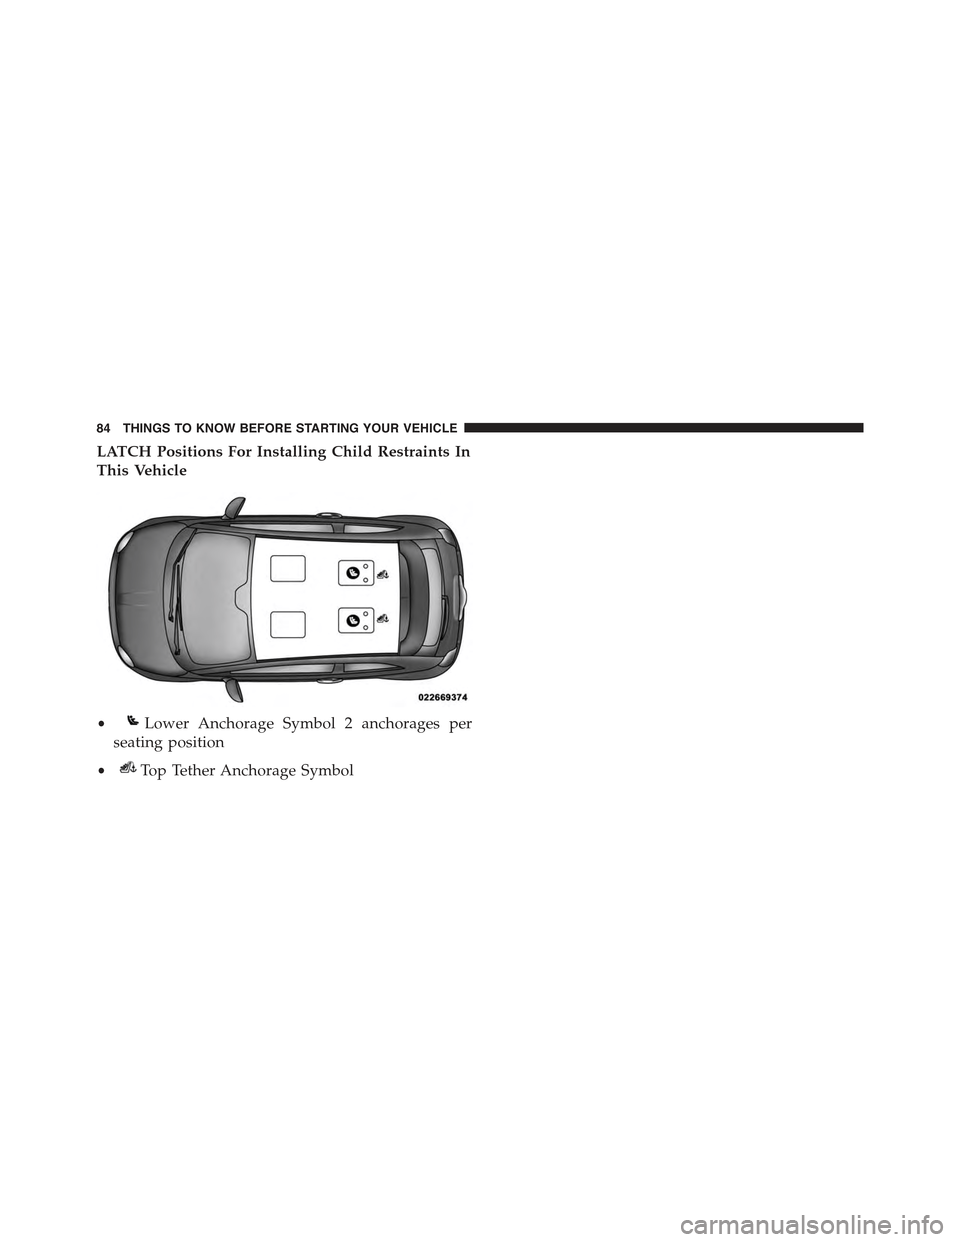 FIAT 500E 2015 2.G Manual Online LATCH Positions For Installing Child Restraints In
This Vehicle
•Lower Anchorage Symbol 2 anchorages per
seating position
•Top Tether Anchorage Symbol
84 THINGS TO KNOW BEFORE STARTING YOUR VEHICL